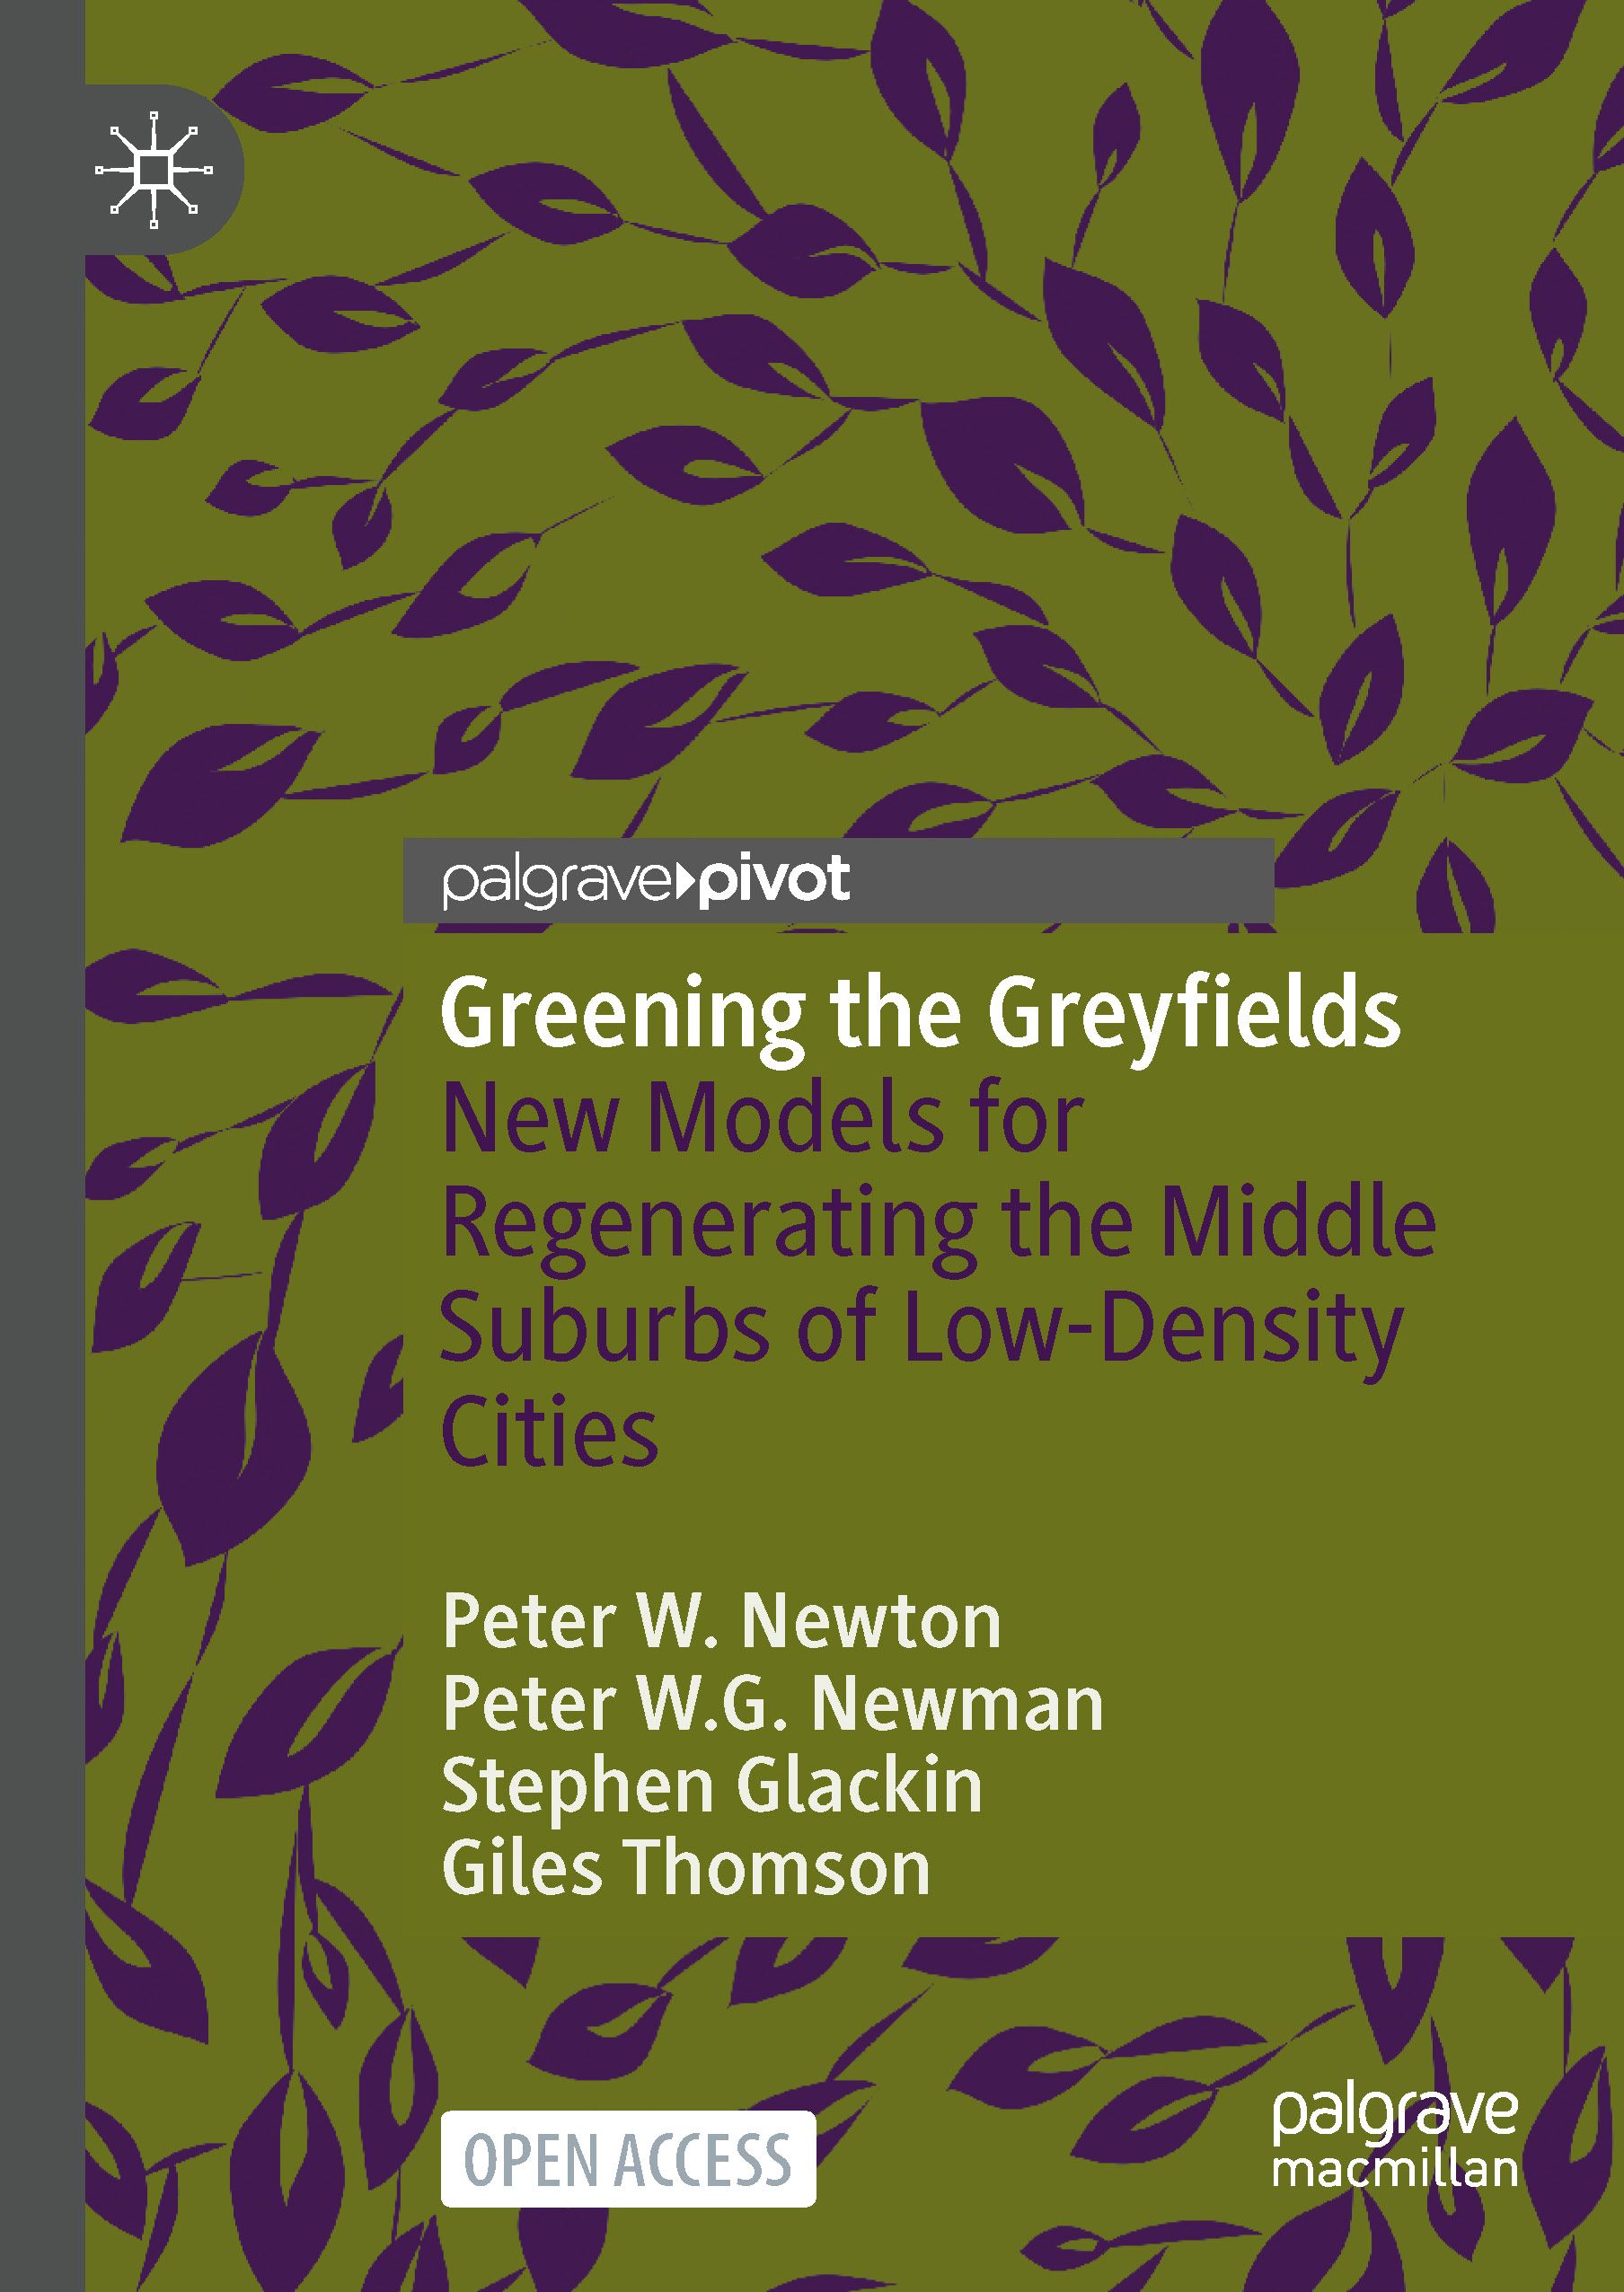 Cover of Greening the Greyfields.